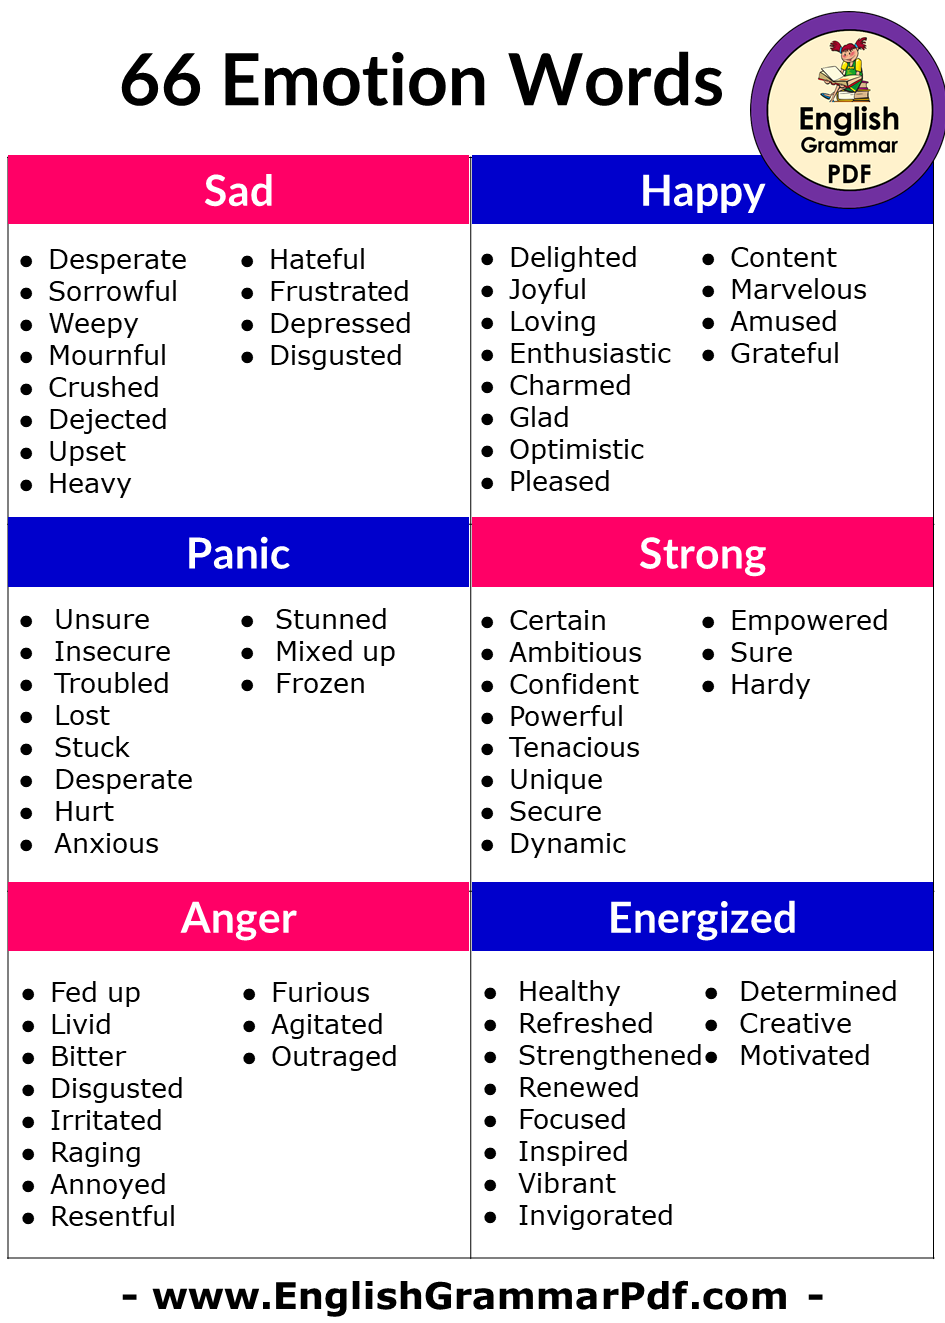 66 Emotions Words List in English, Sad, Panic, Happy, Energized, Anger, Strong